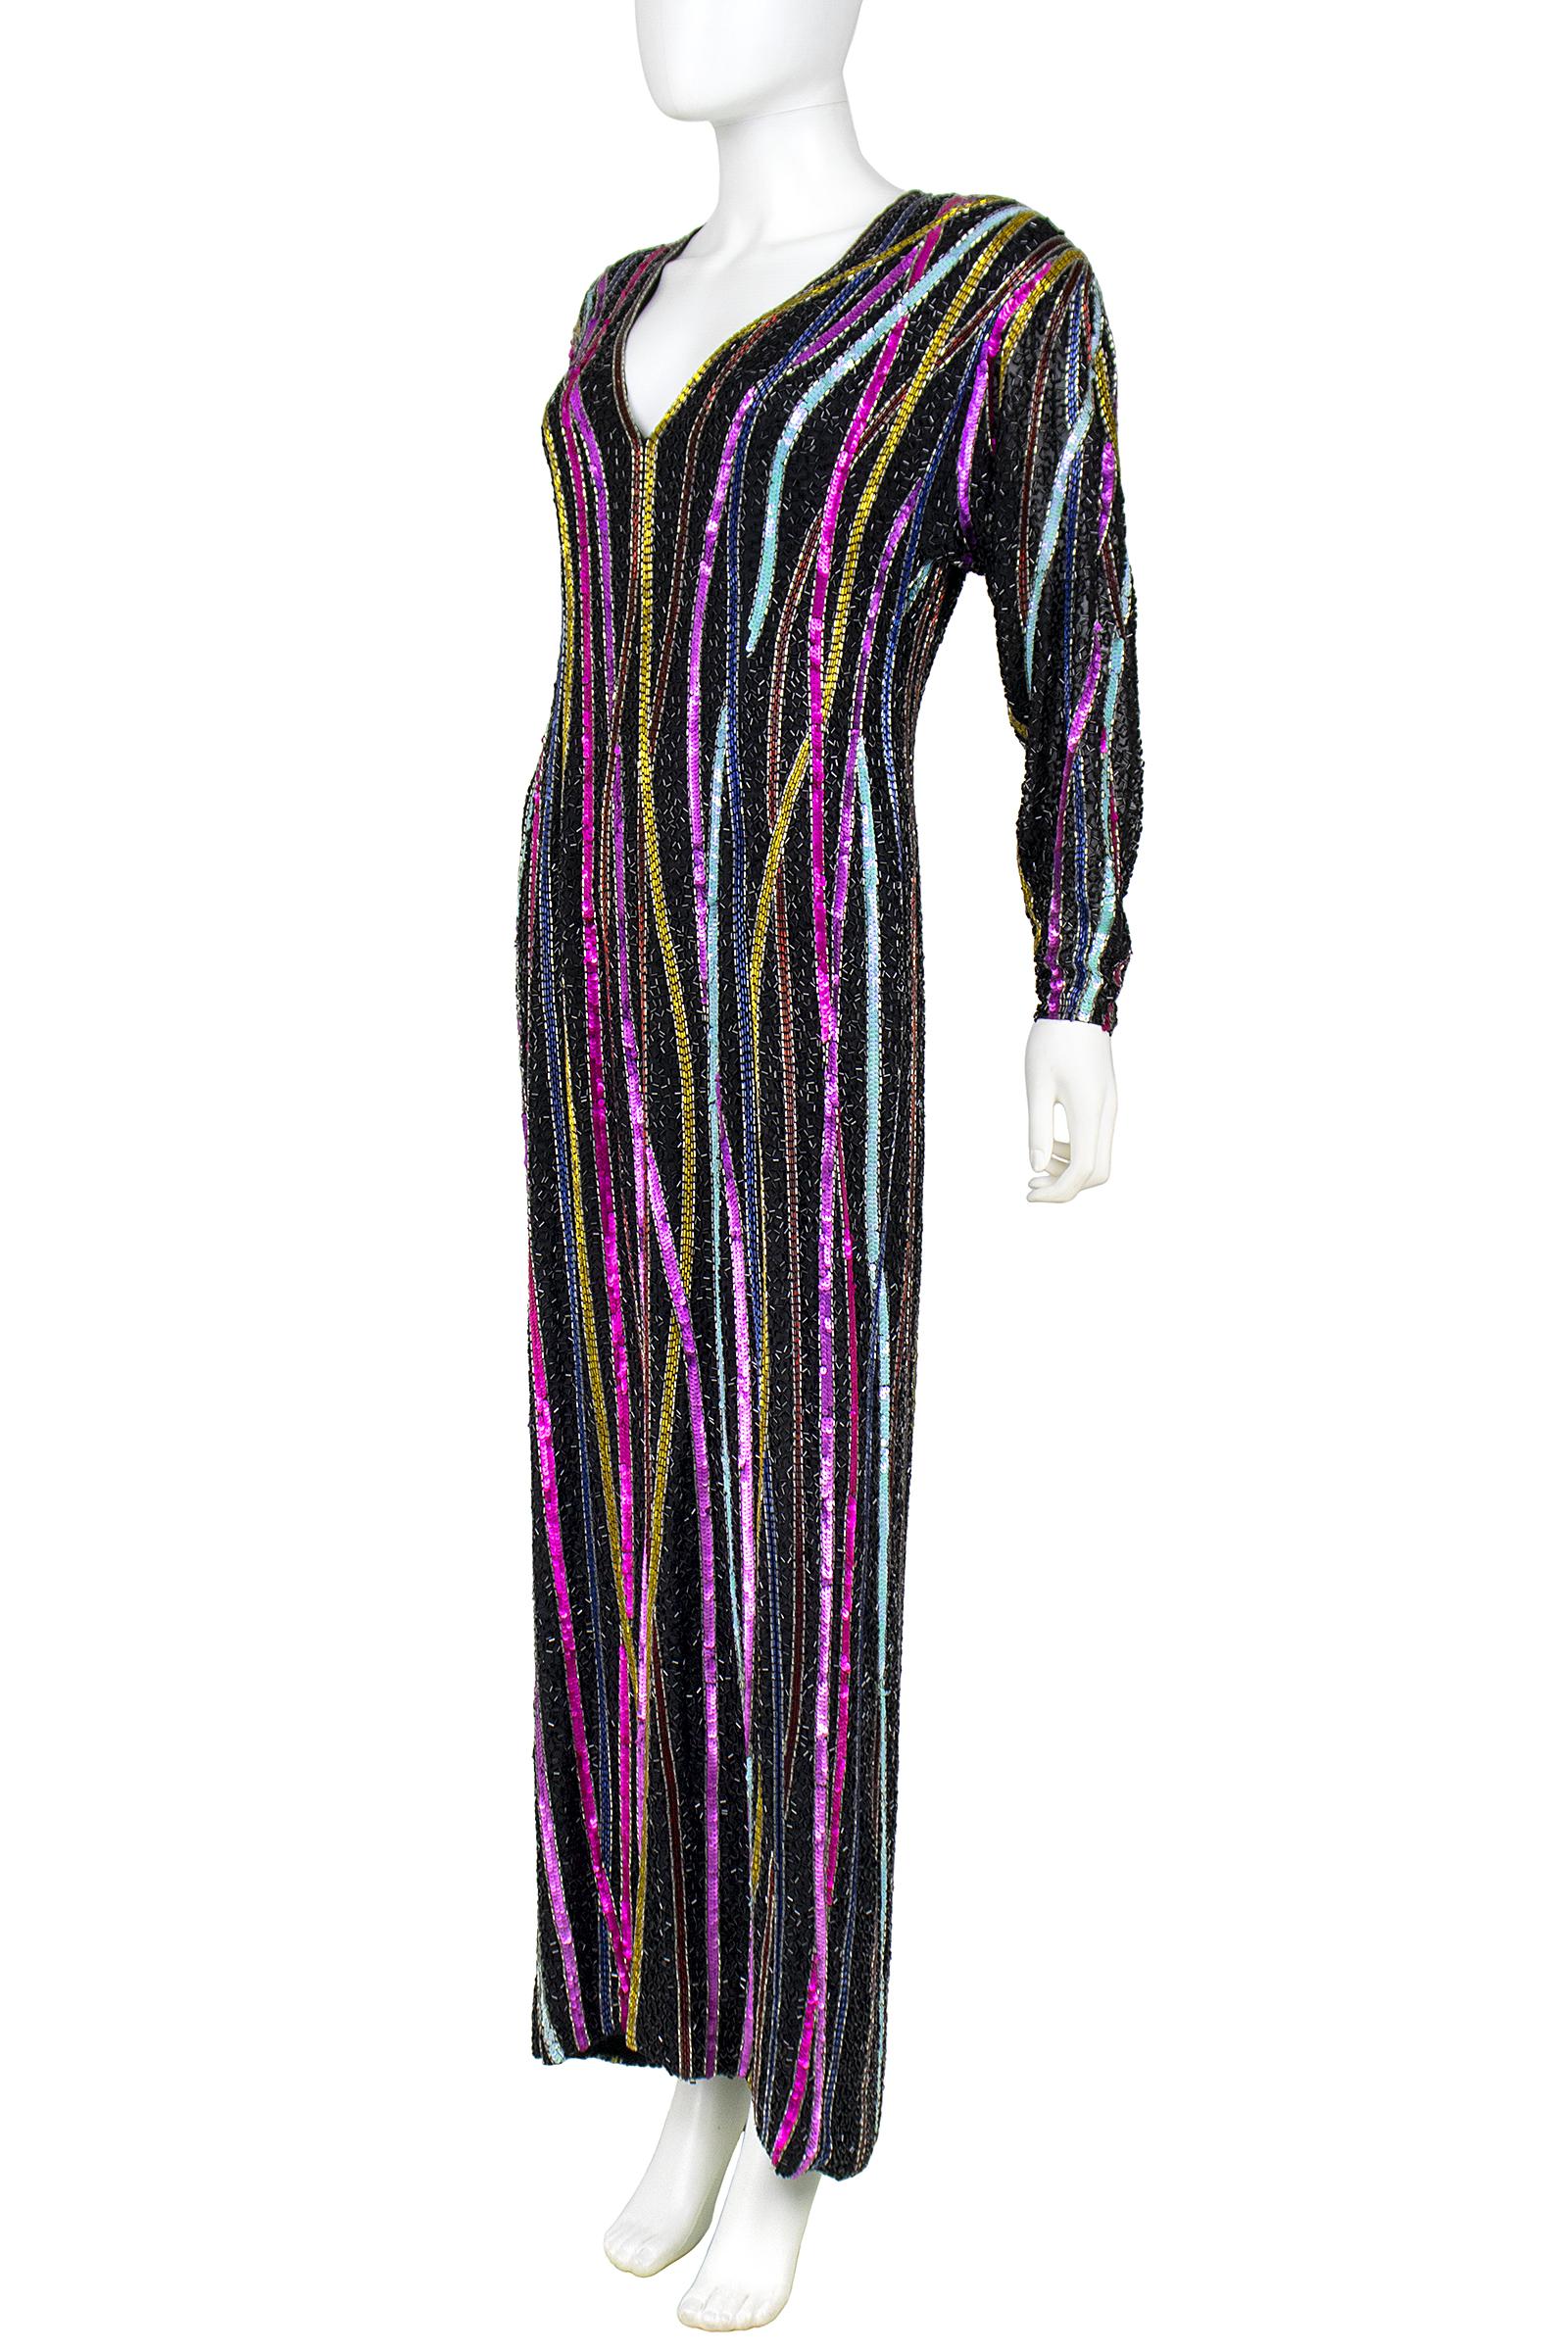 Women's 1980s Bob Mackie RARE Signature Multicolor Beaded Black Gown with Front Slit